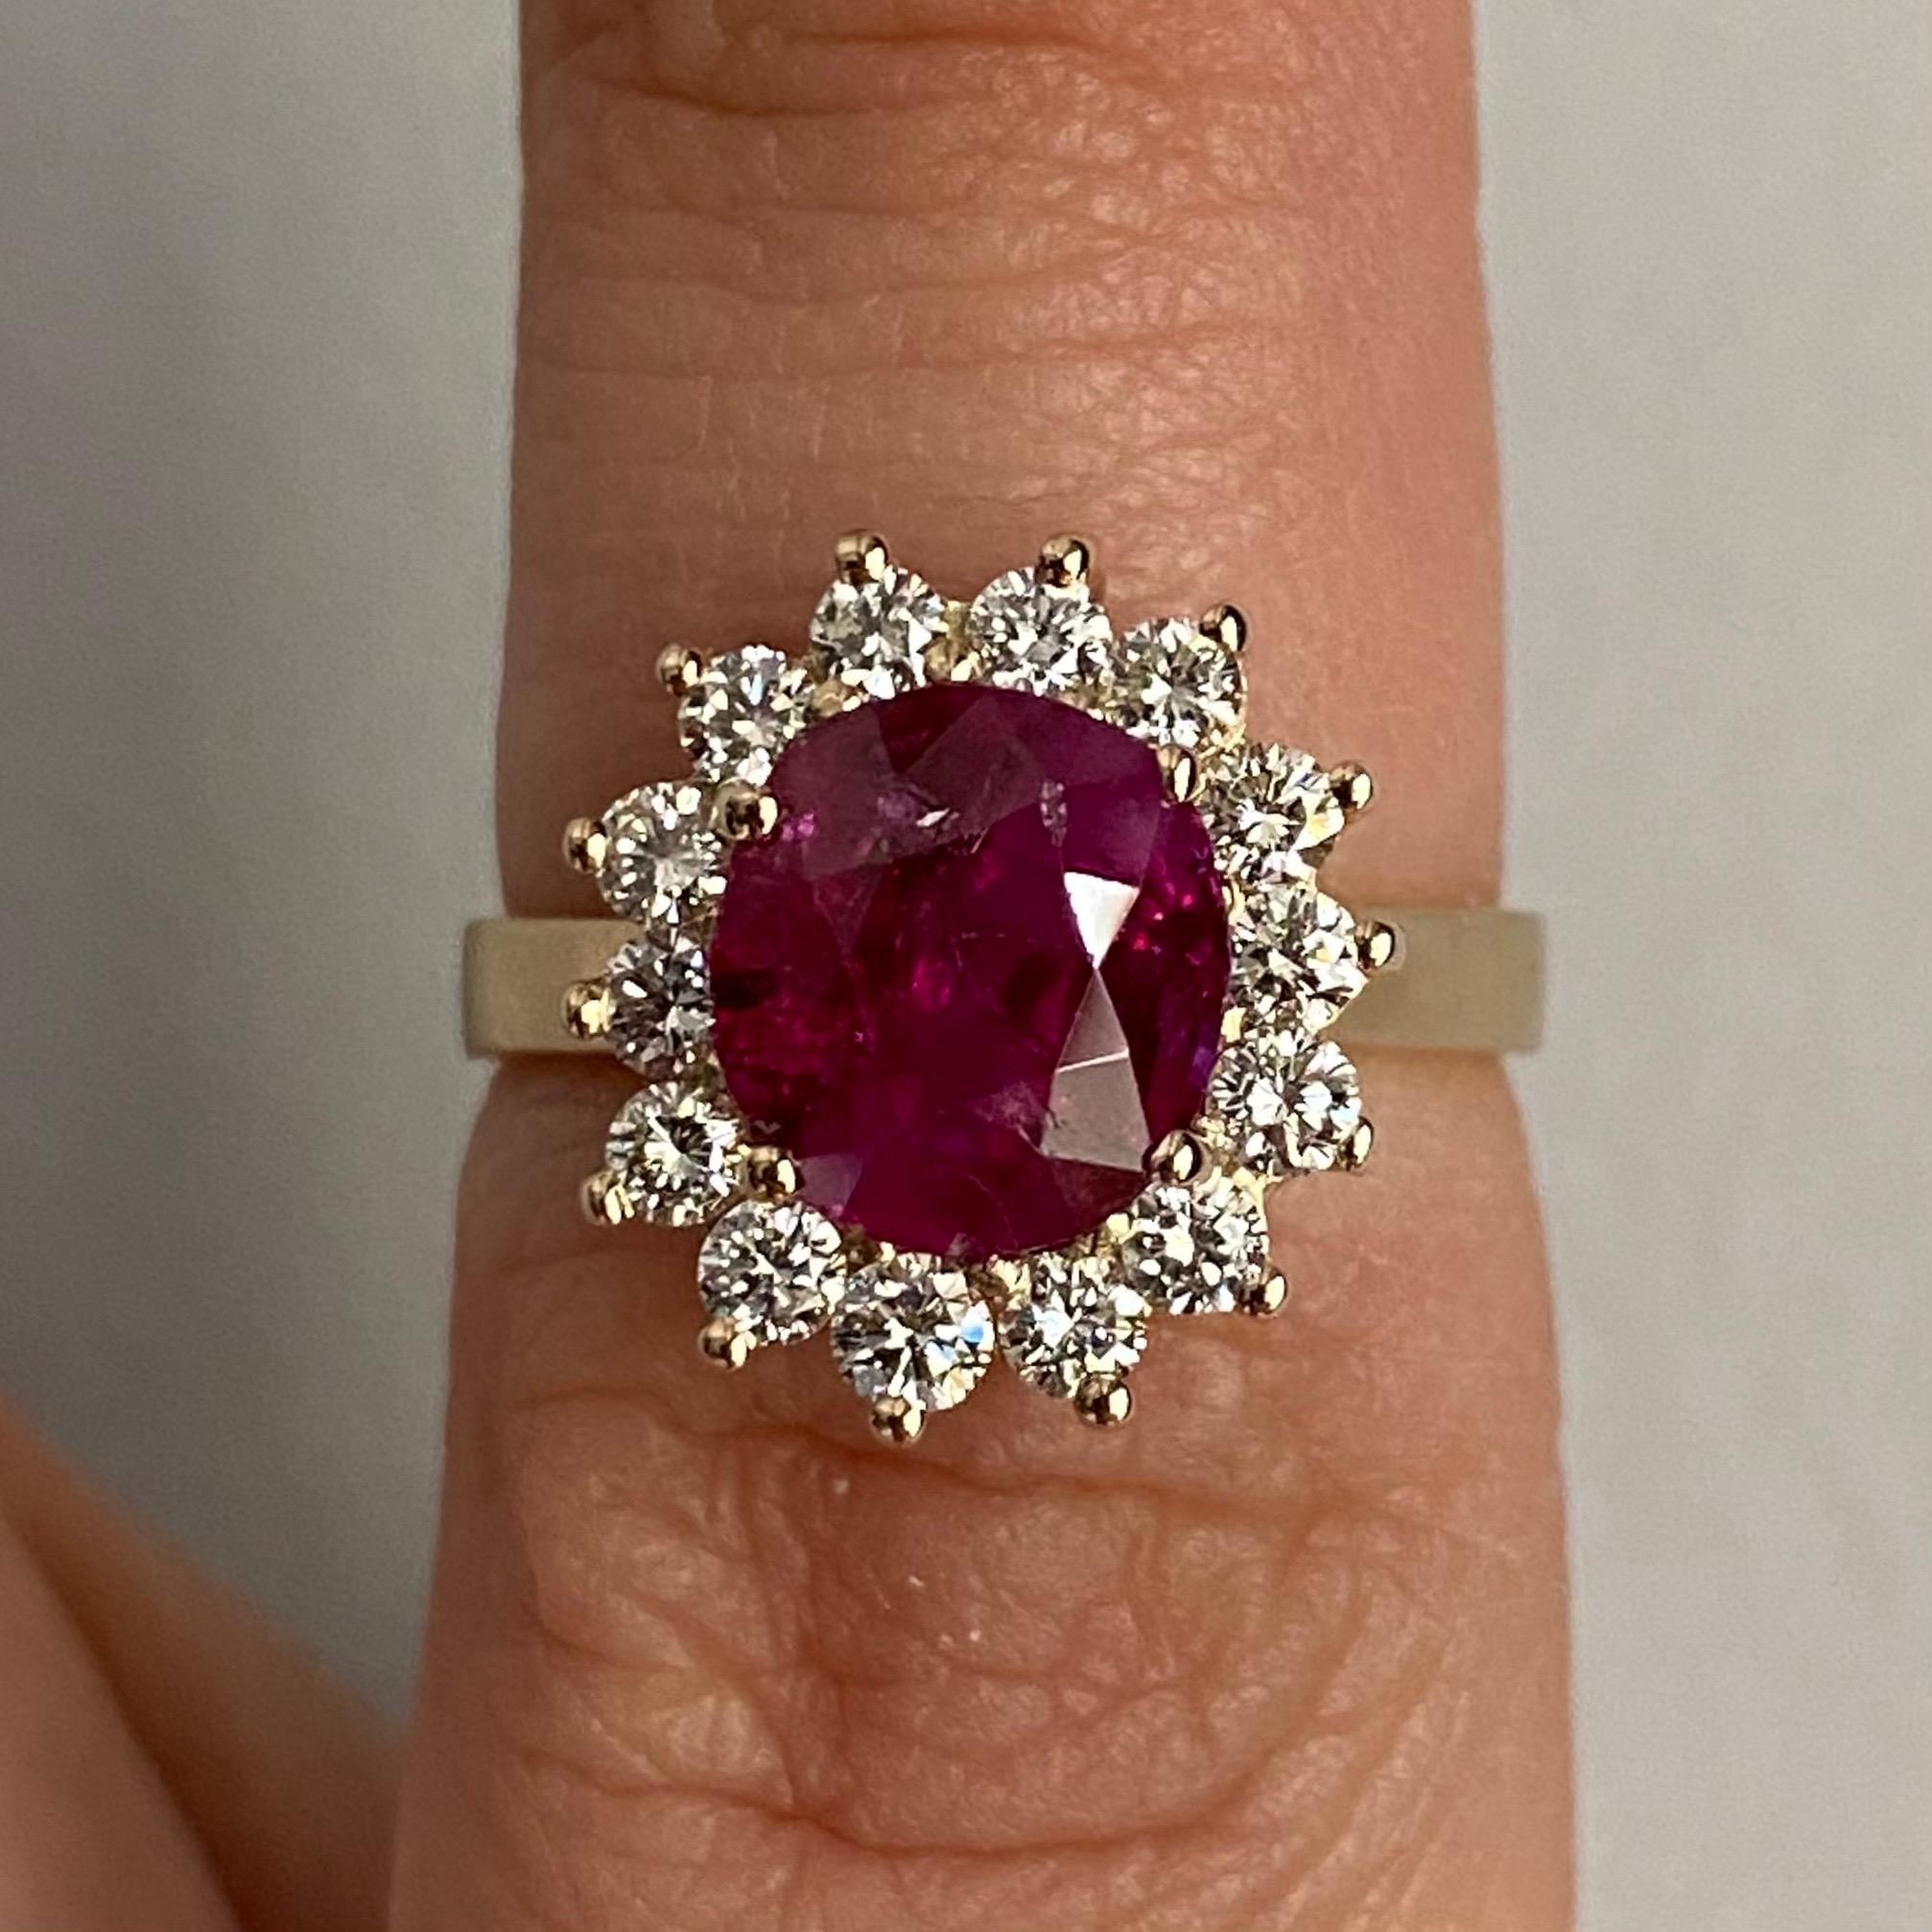 Contemporary Natural Unheated Burmese Ruby and Diamond Cluster Engagement Ring in 19.2K Yellow Gold, Portuguese, circa 2020. A charming “Lady Di” engagement ring featuring a dazzling natural unenhanced Burmese ruby claw-set to the centre, encircled